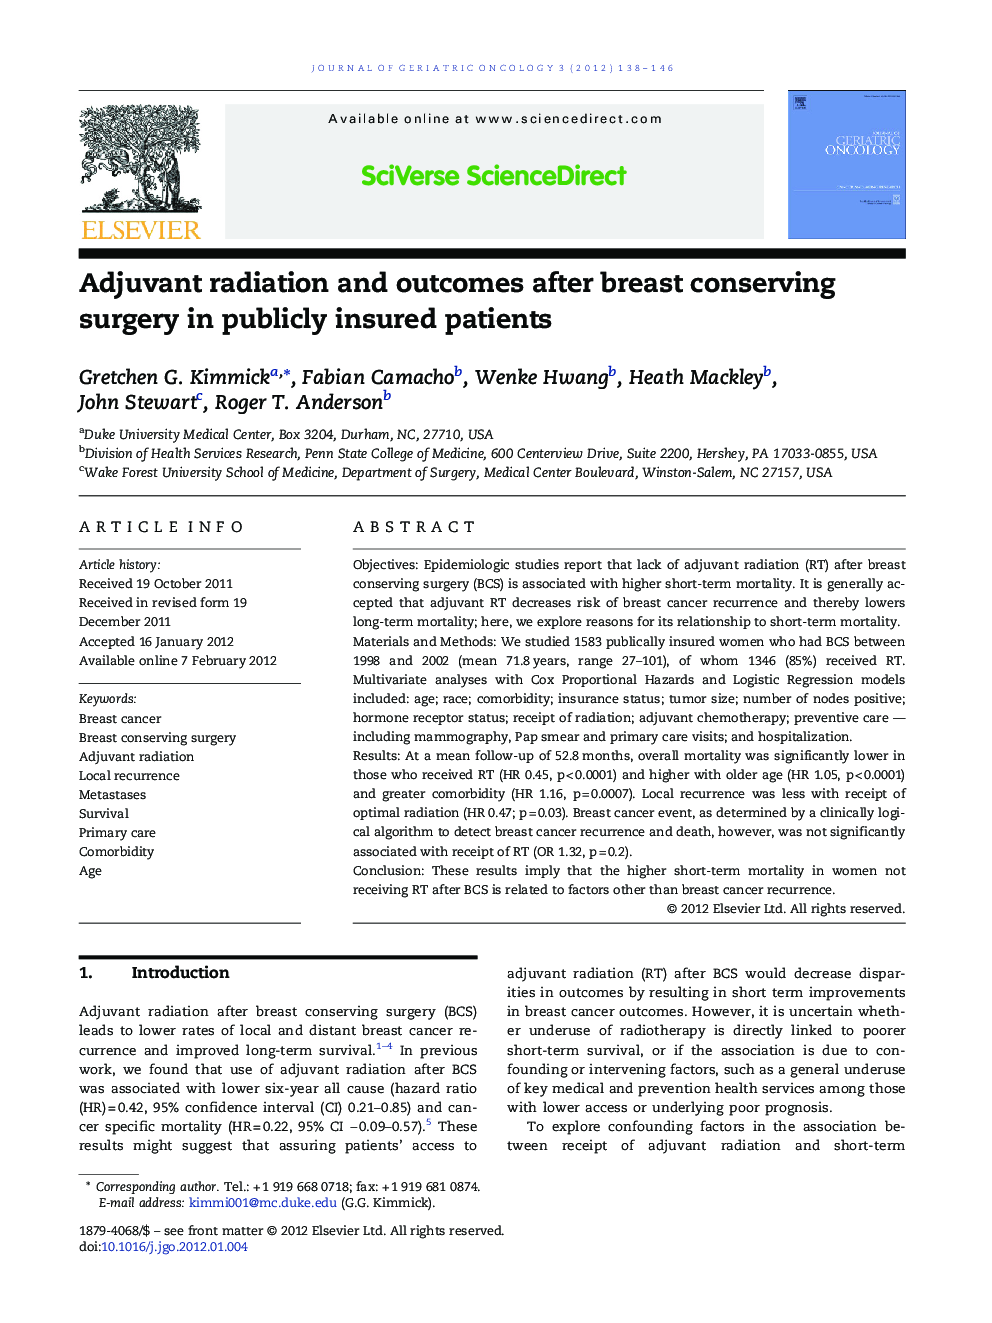 Adjuvant radiation and outcomes after breast conserving surgery in publicly insured patients